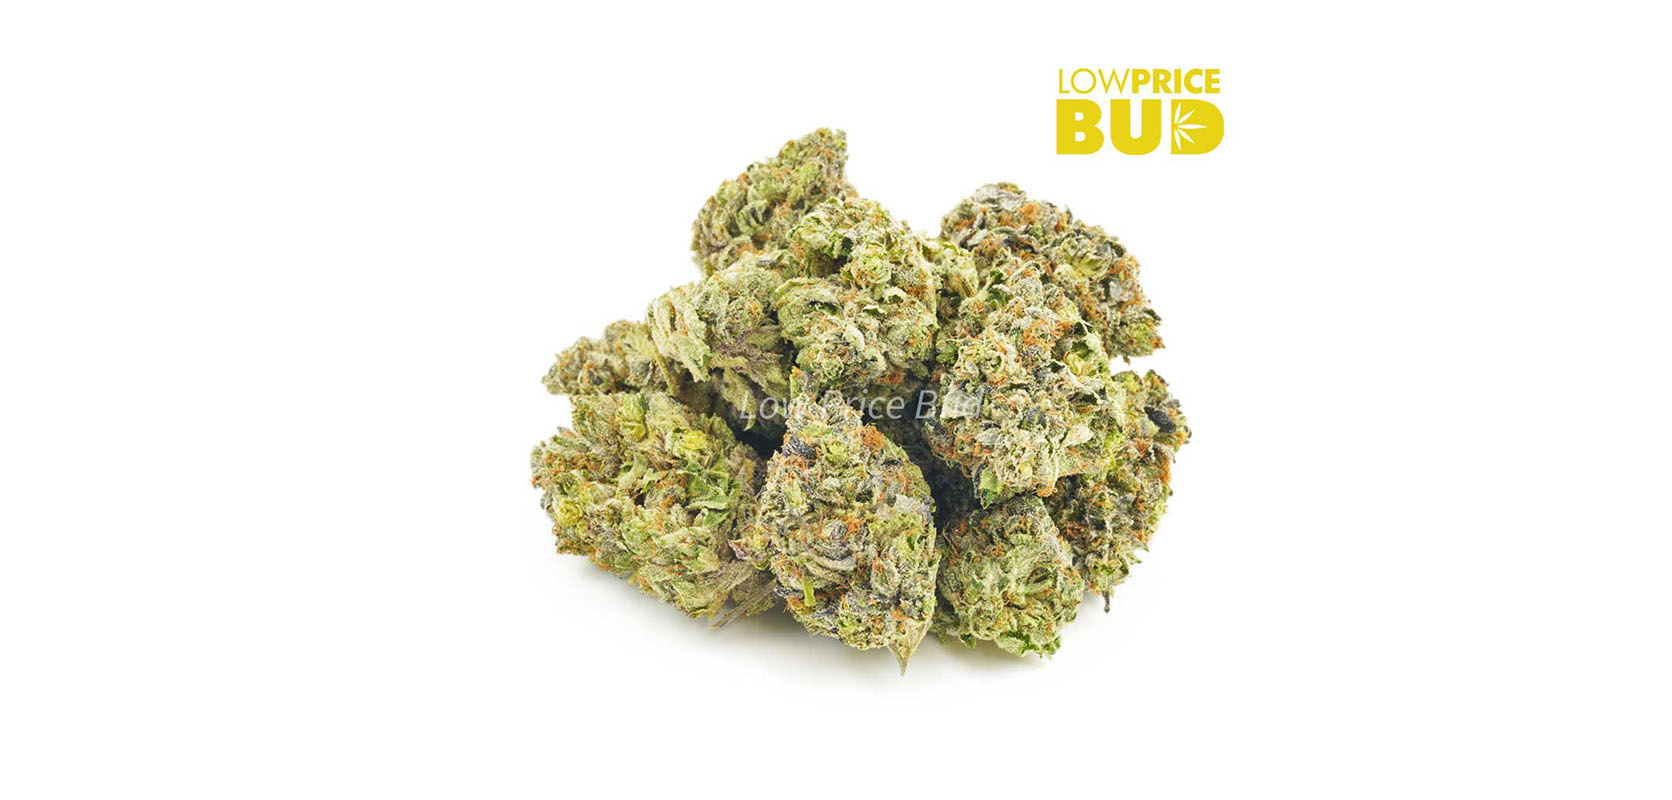 GSC buds. Buy weed and cheap weed vaporizer online in Canada. purple diesel strain, guava cake strain, strawnana strain weed for sale online dispensary.